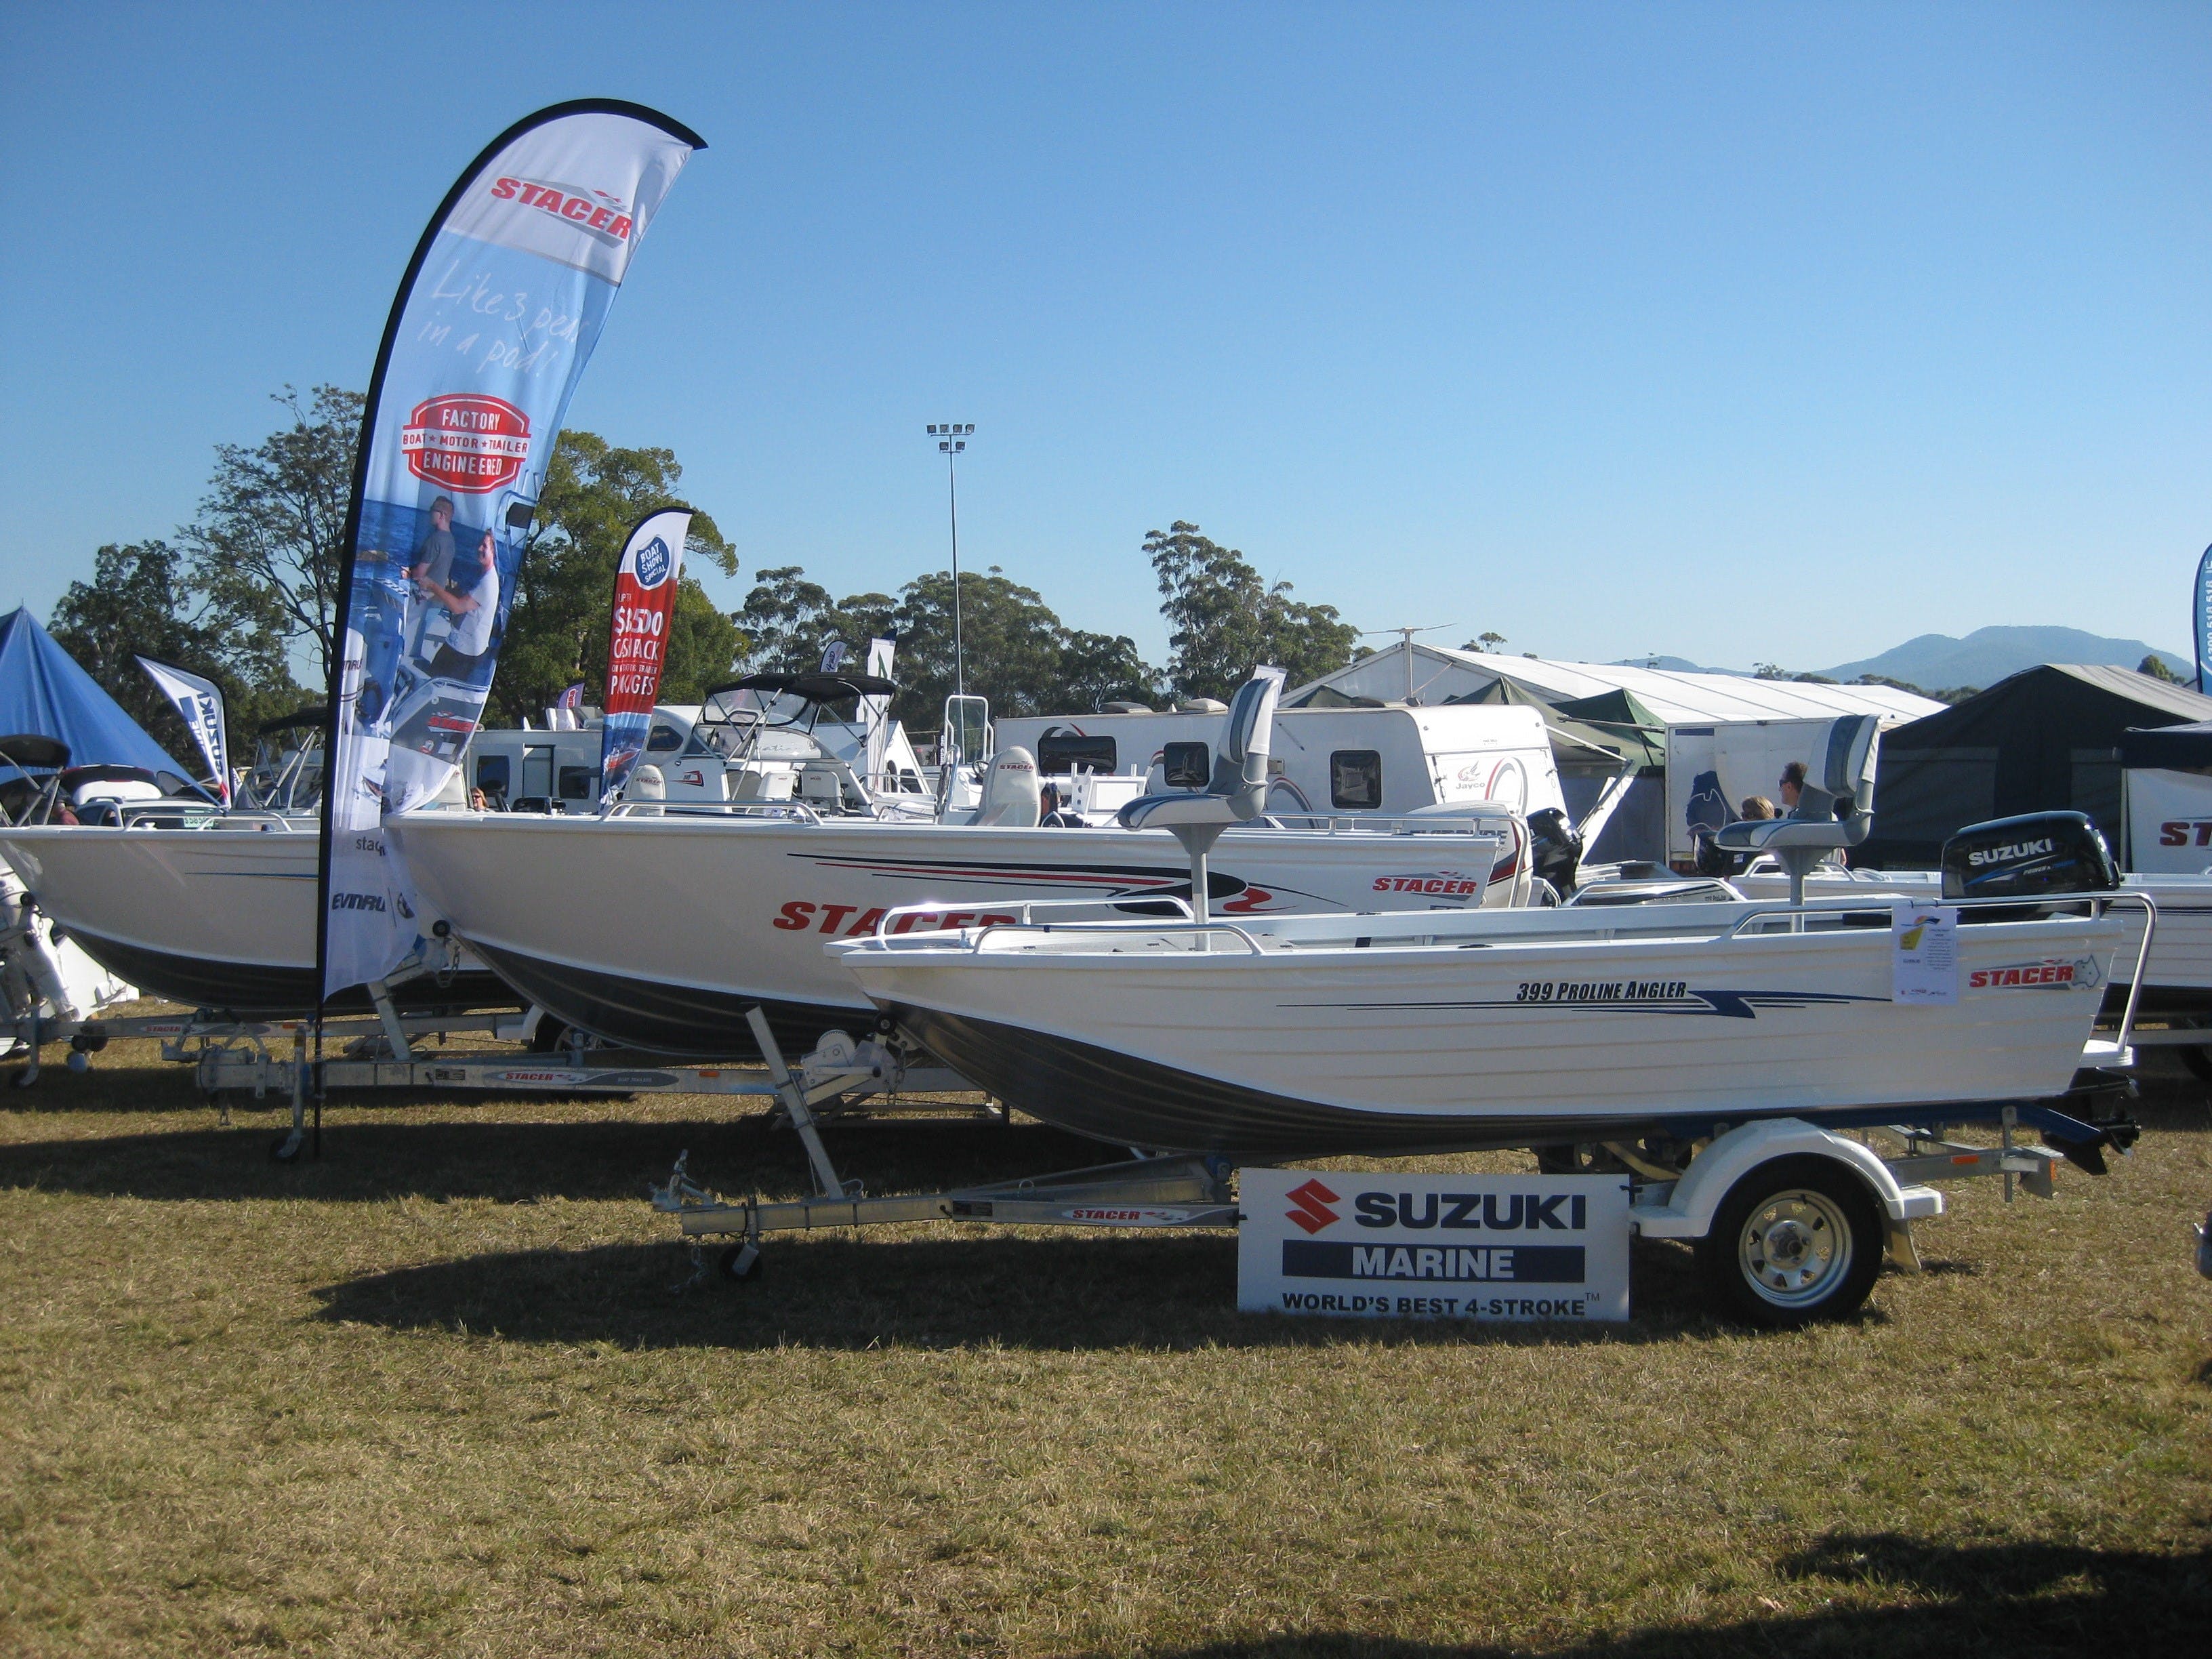 Mid North Coast Caravan Camping 4WD Fish and Boat Show - Perisher Accommodation